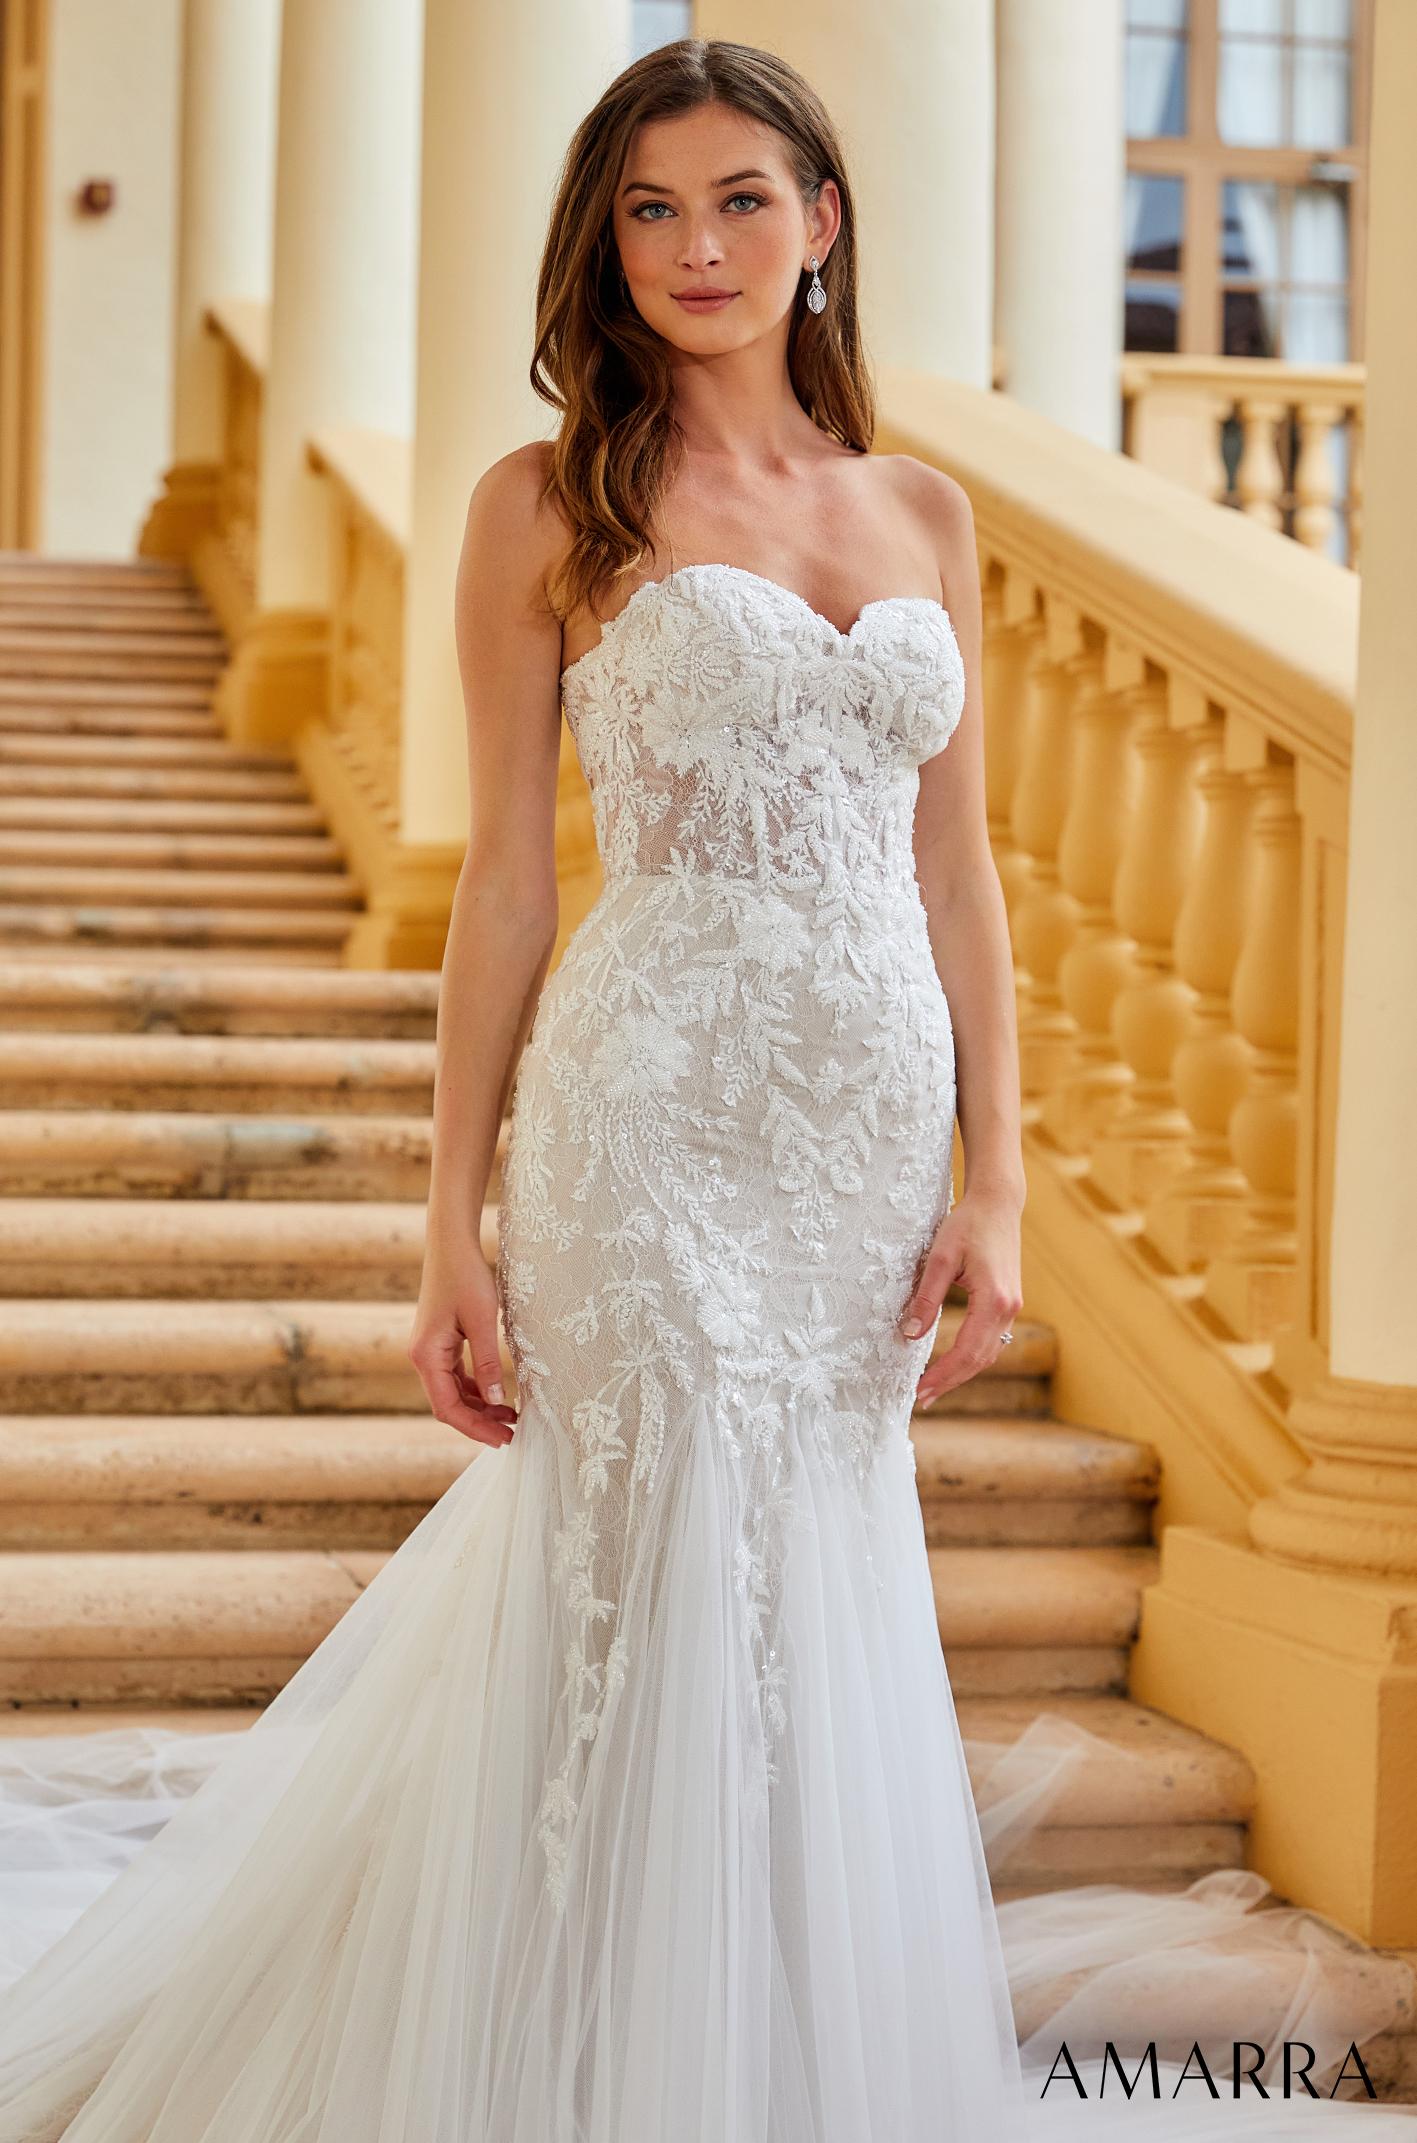 Amarra BELLA 84375 Sheer Beaded Mermaid Wedding Dress Off the shoulder Bridal Gown Featuring detachable shoulder straps that gracefully hang off the shoulders and beautiful lace embroidery throughout the bodice, Bella is sure to have you looking and feeling like a majestic beauty. The fitted waist hugs and highlights your curves, creating a beautiful hourglass silhouette.